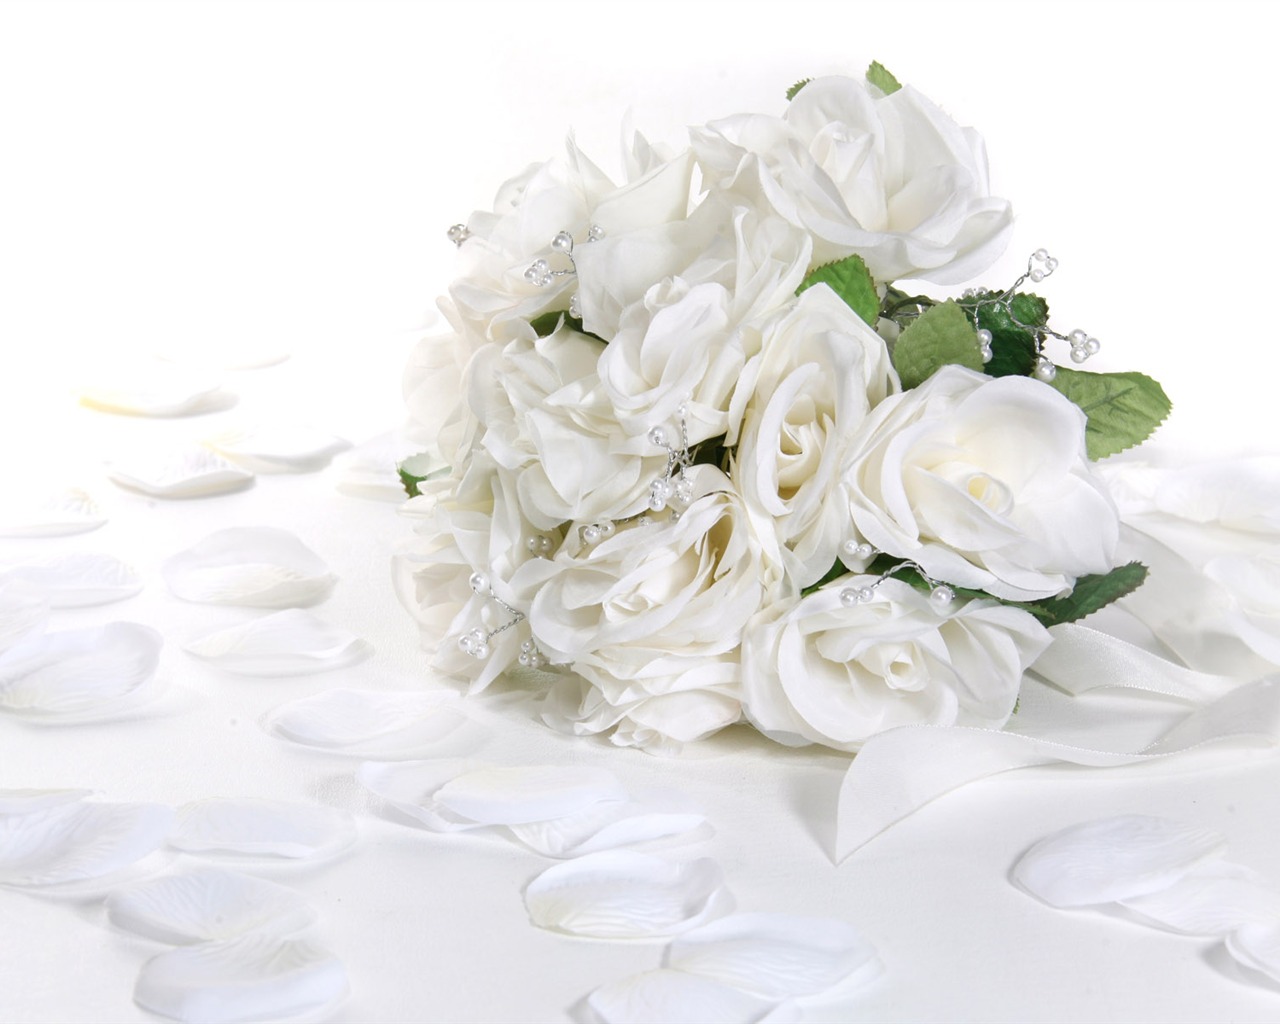 Weddings and Flowers wallpaper (2) #2 - 1280x1024